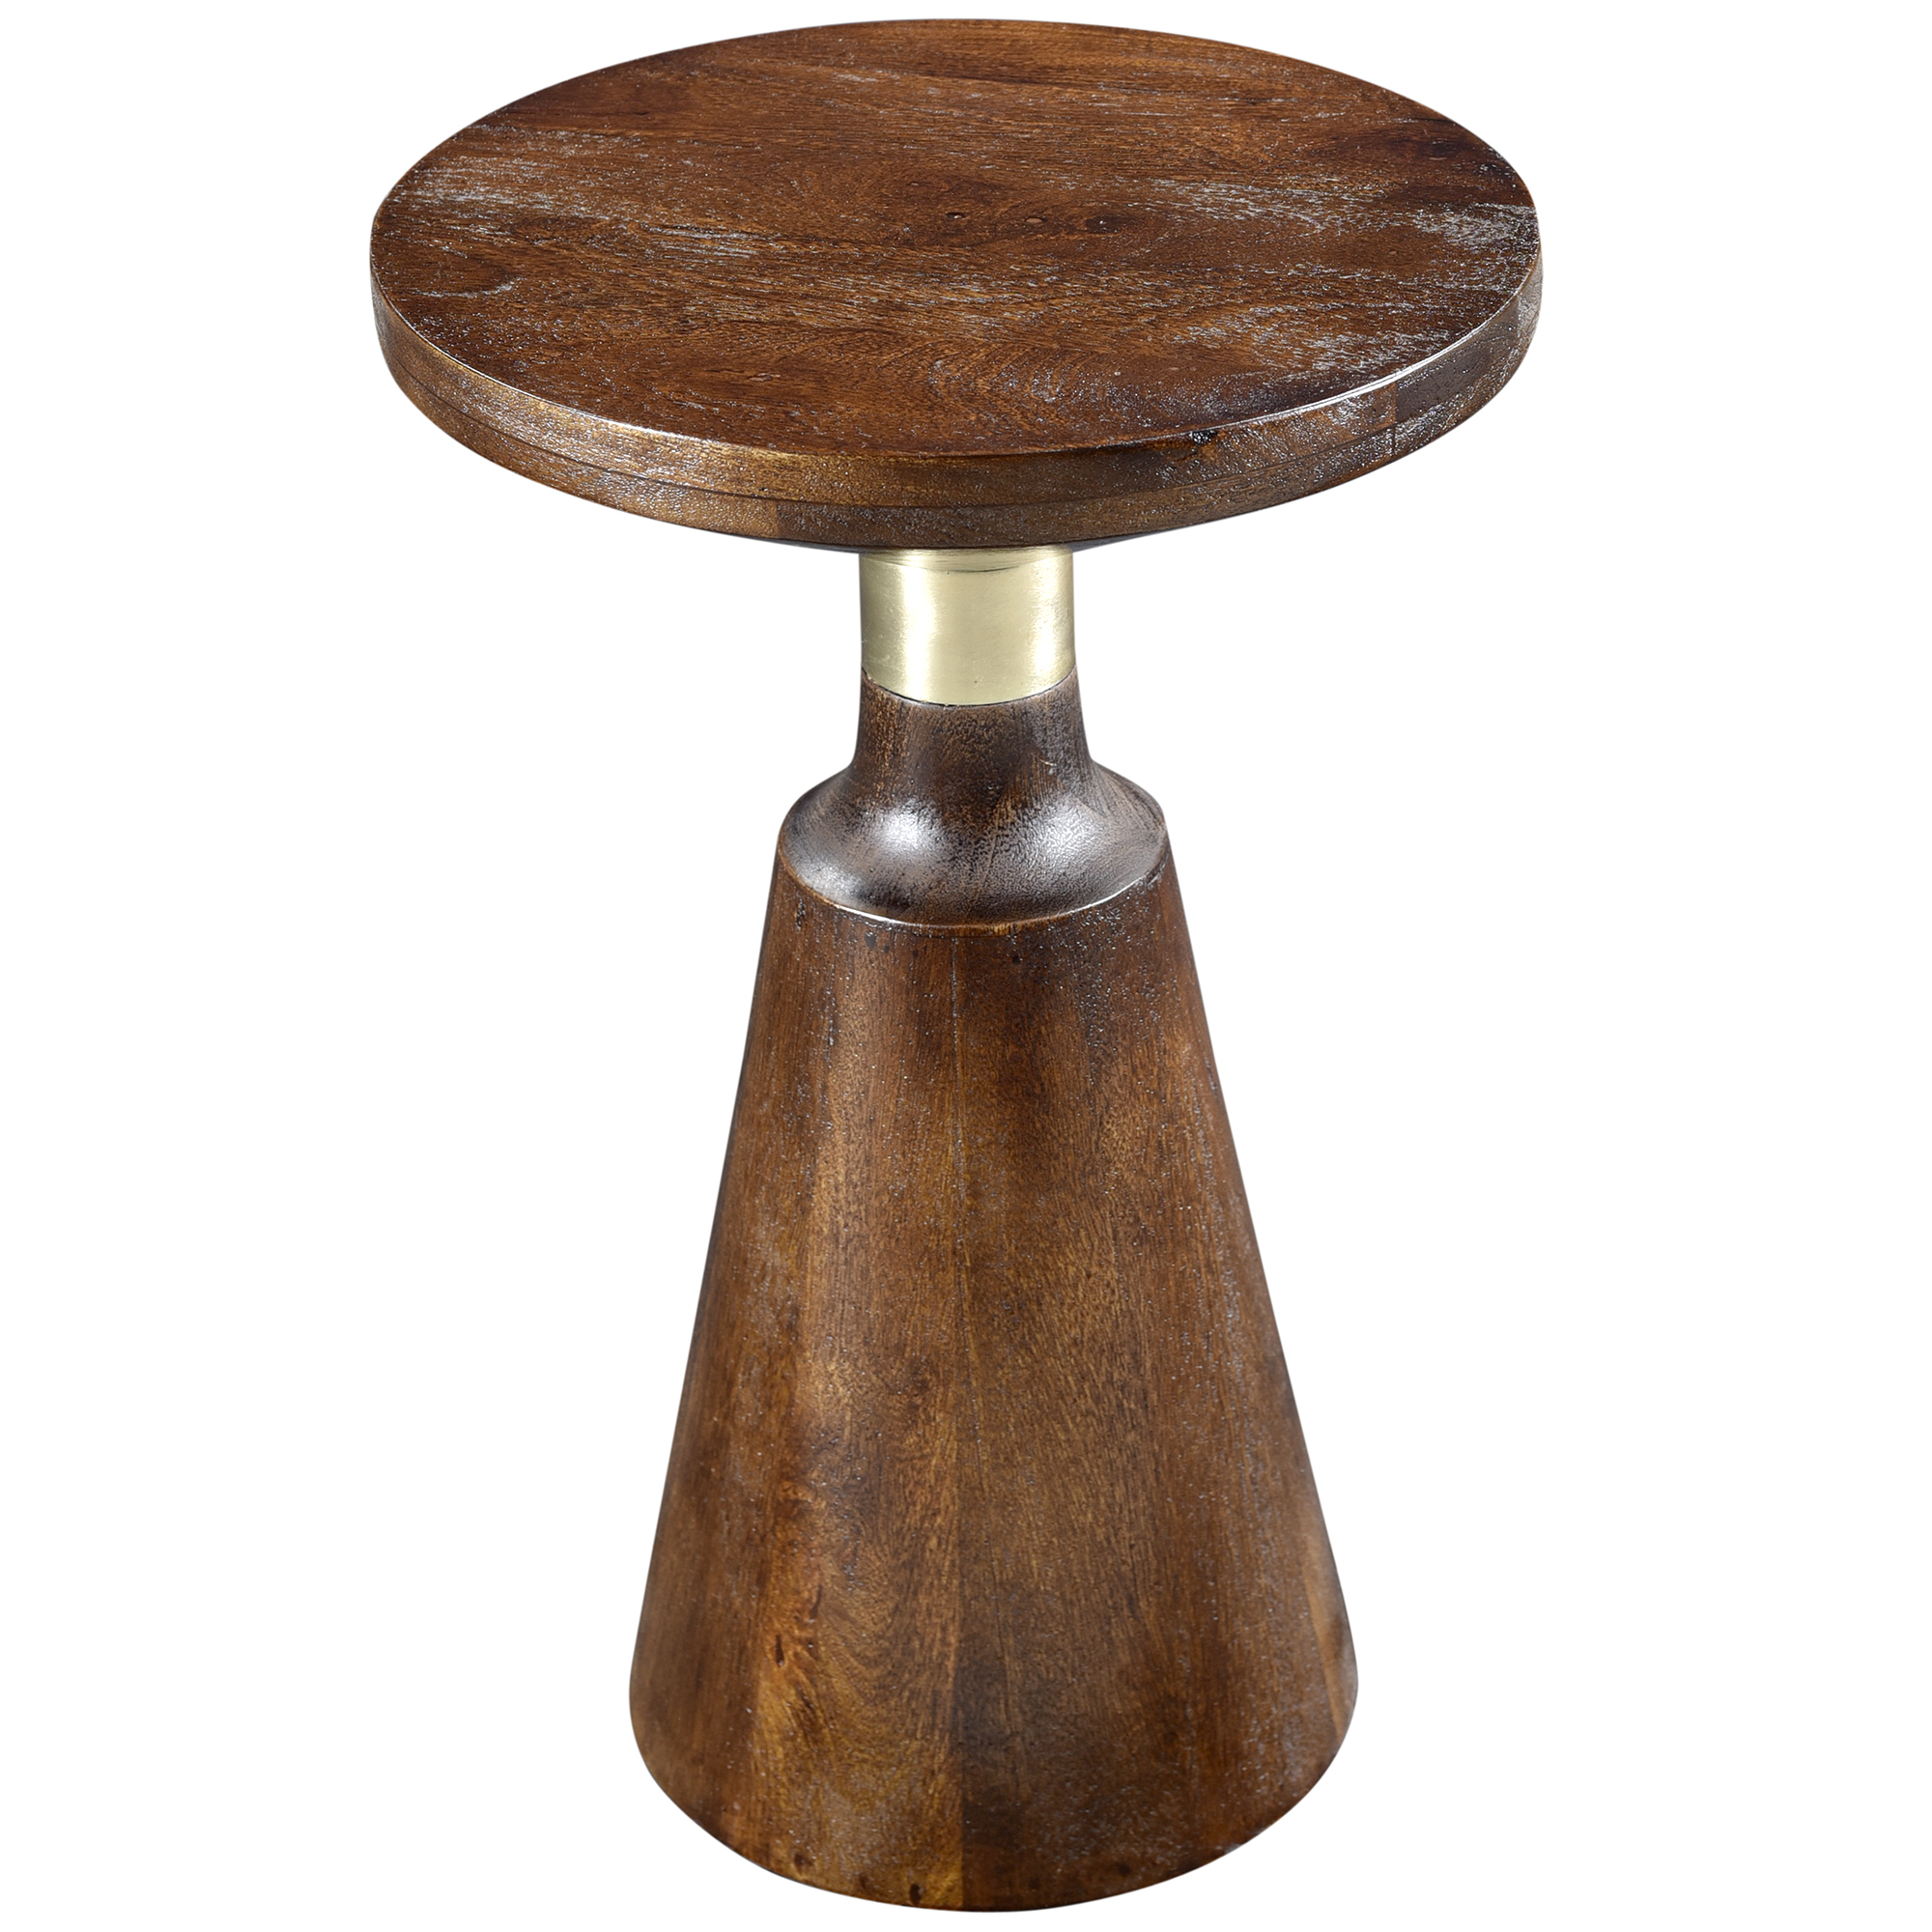 aron accent table walnut console midha tables toronto furniture brampton mississauga etobicoke scraborough caledon oakville small porch chairs round brass glass side bedside and